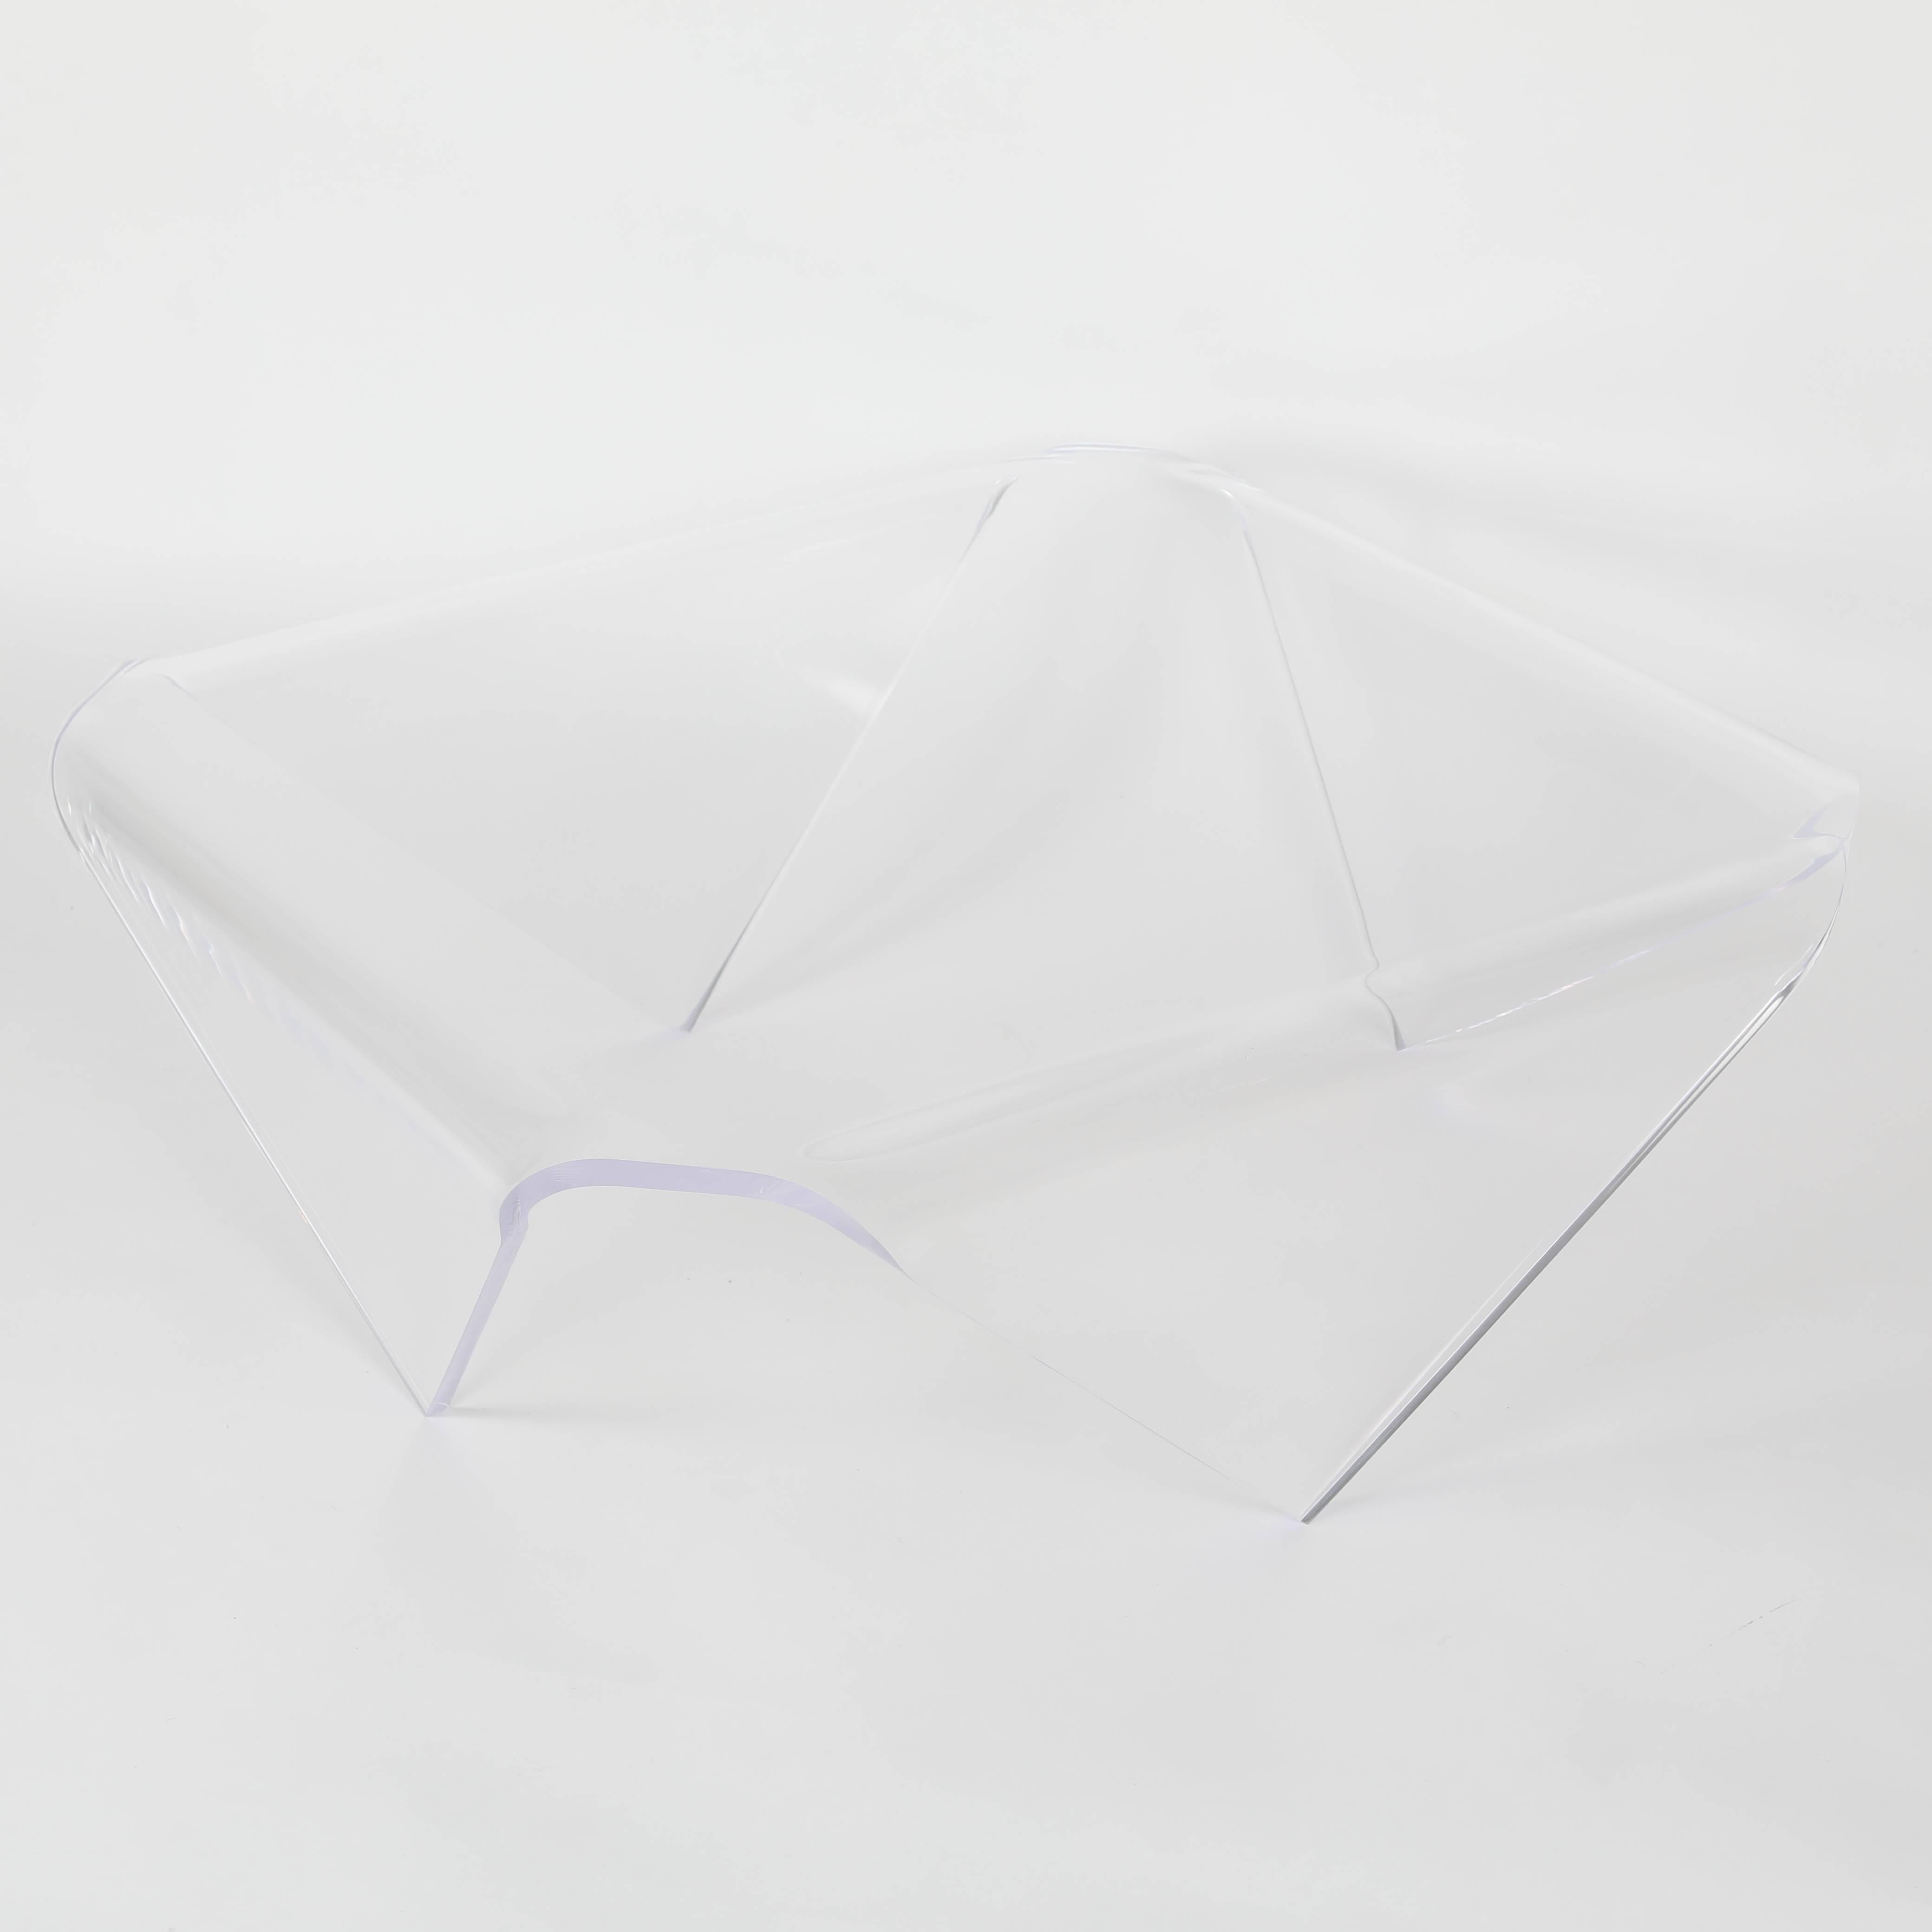 Full Circle Modern Original Folded Acrylic Coffee Table In Excellent Condition For Sale In Brooklyn, NY